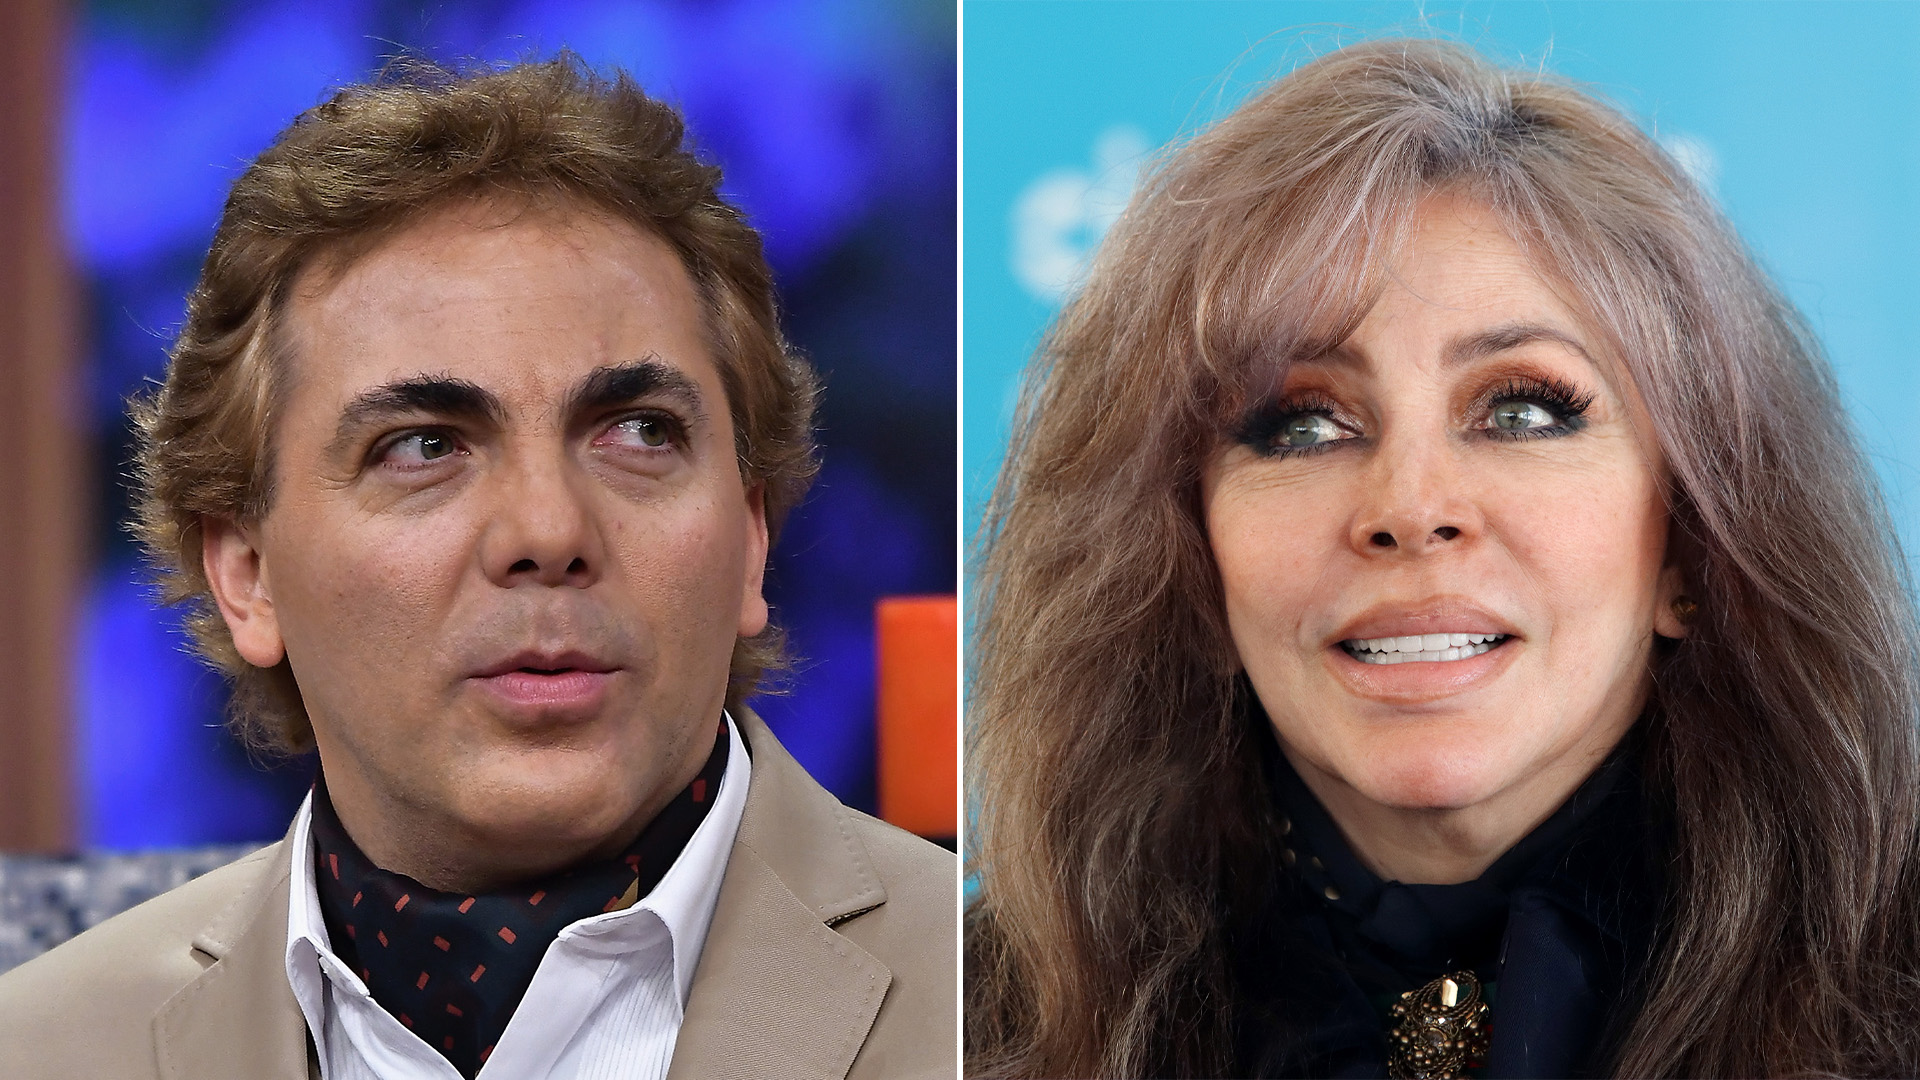 The gray look of "The Vero" it's a big eye-catcher that suits her, according to her son (Photos: Getty Images)